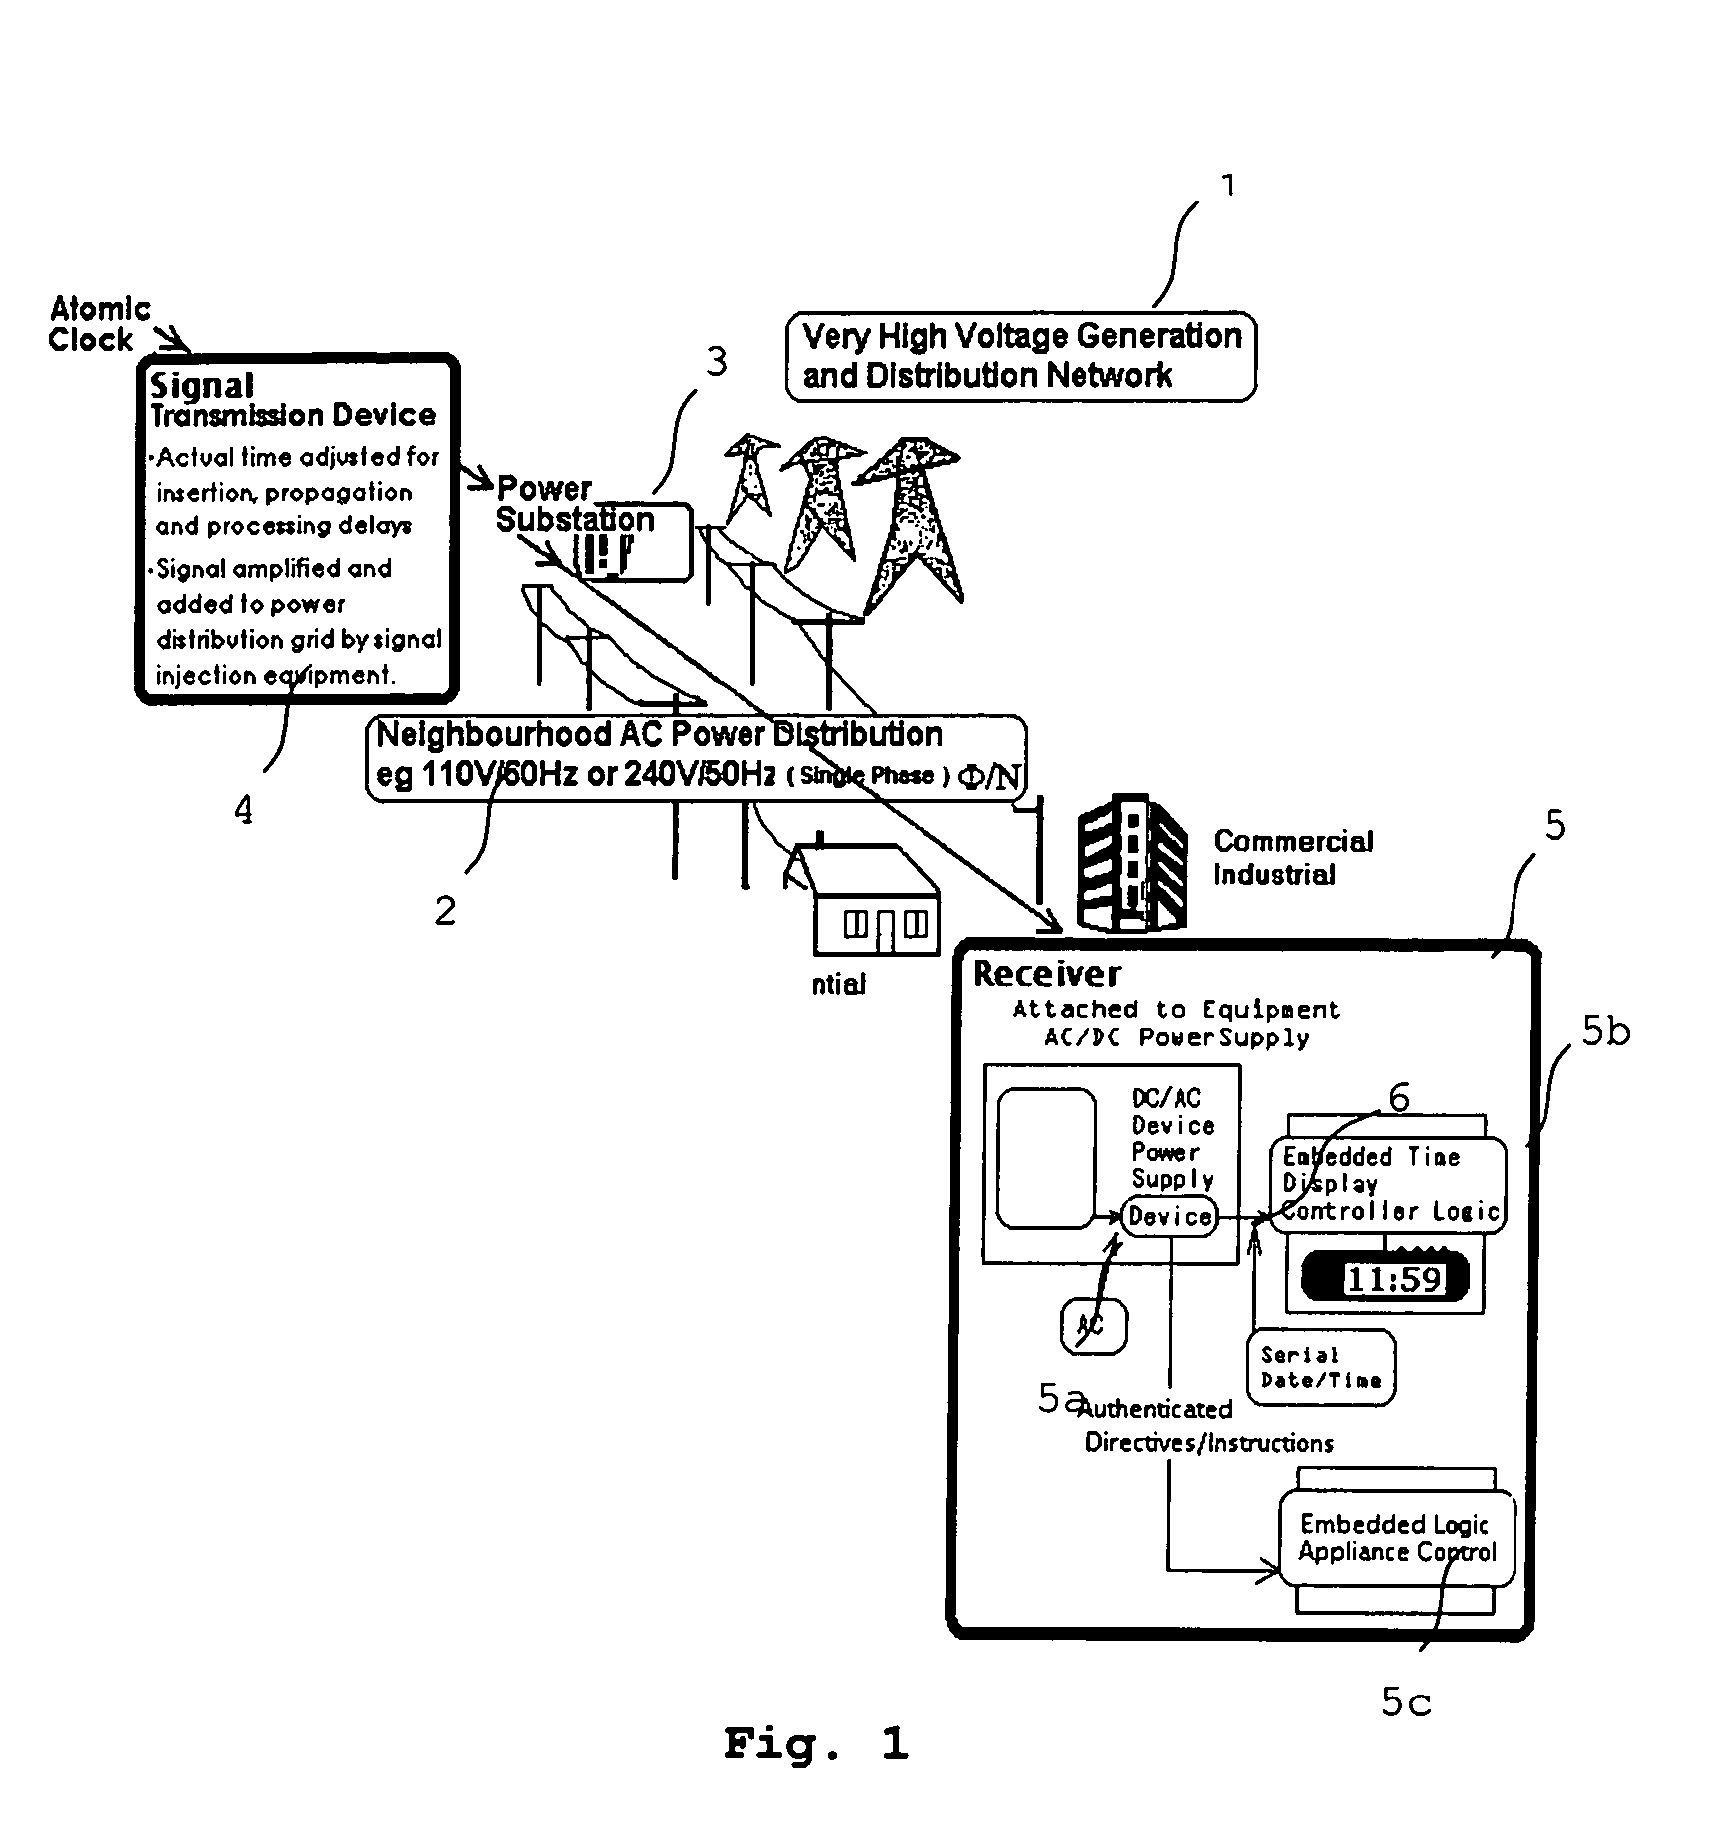 System and method for transmitting control information over an AC power network